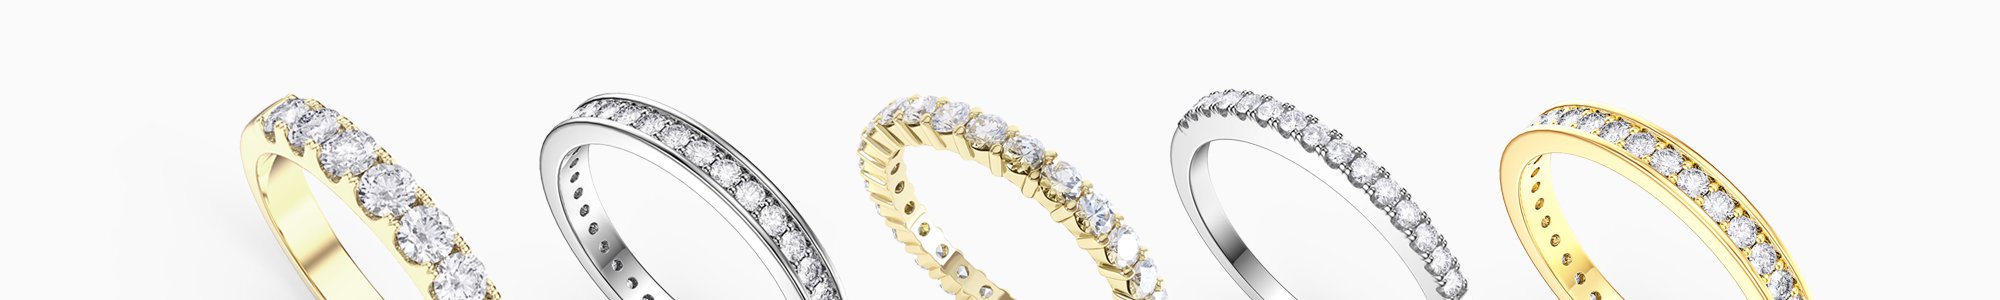 Shop Wedding Rings by Jian London.  Buy direct and save from our wide selection of wedding rings at the Jian London Jewellery Store. Free UK Delivery